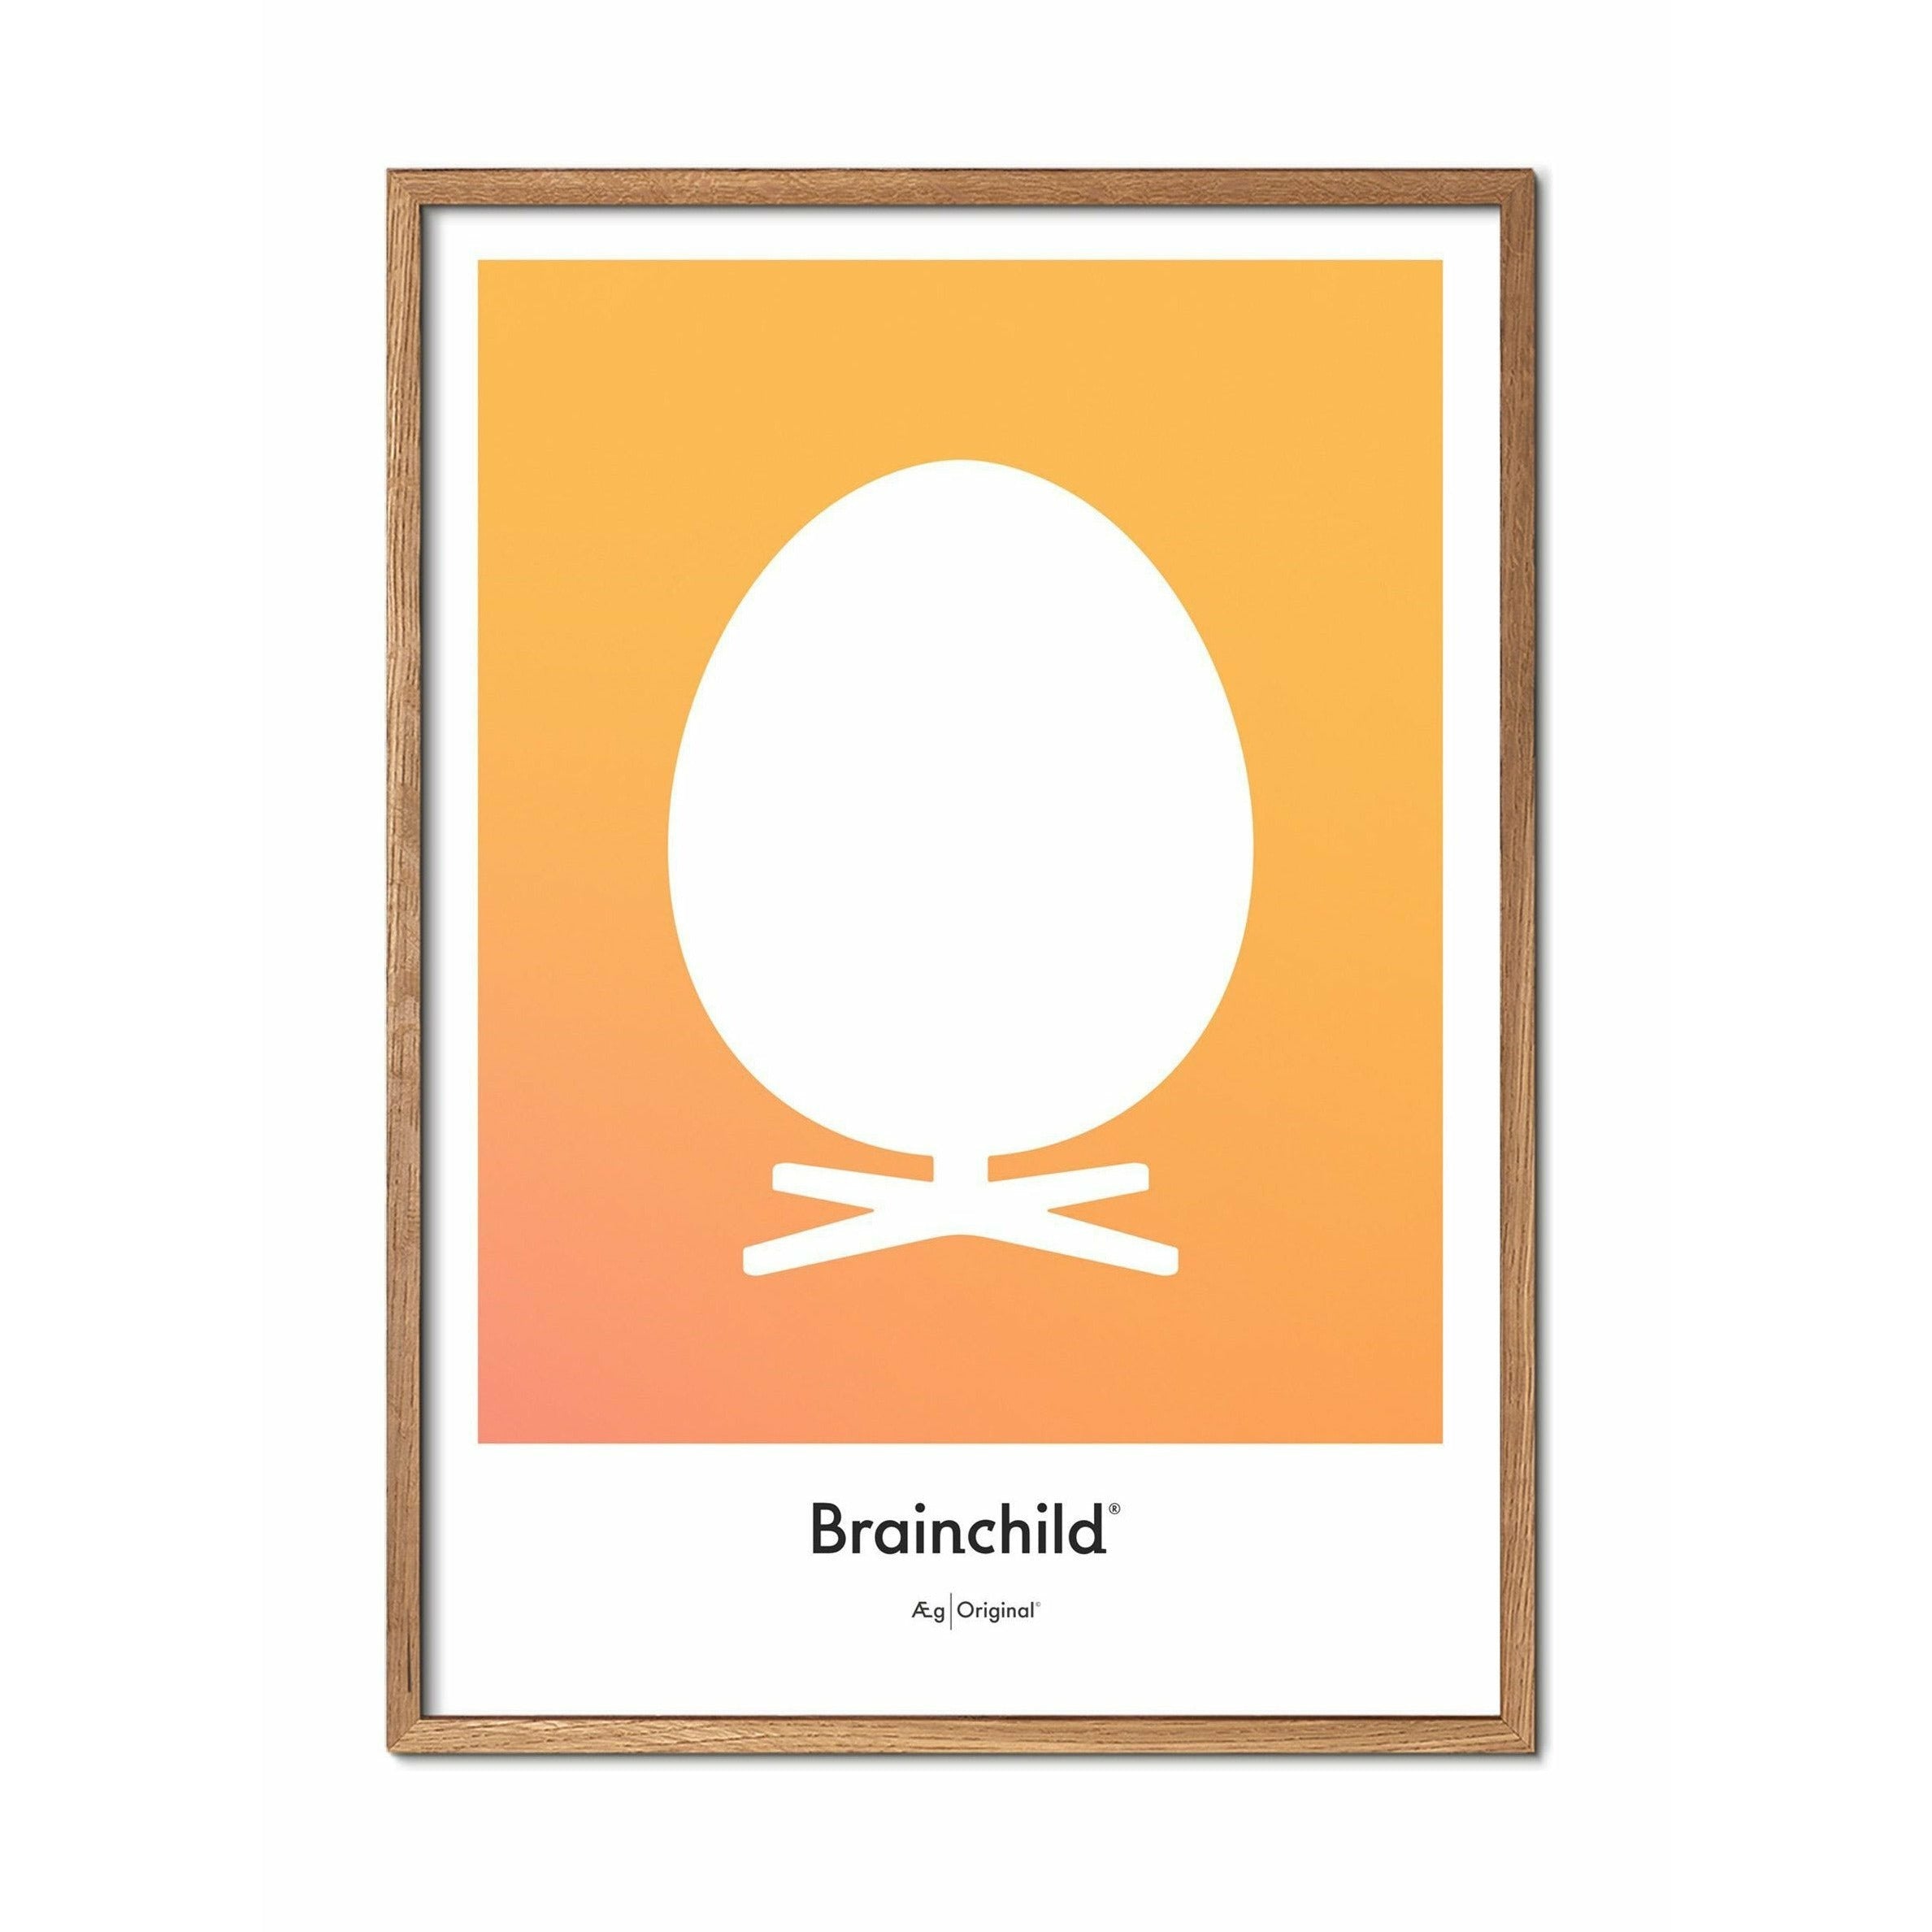 Brainchild Egg Design Icon Poster, Frame Made Of Light Wood A5, Yellow